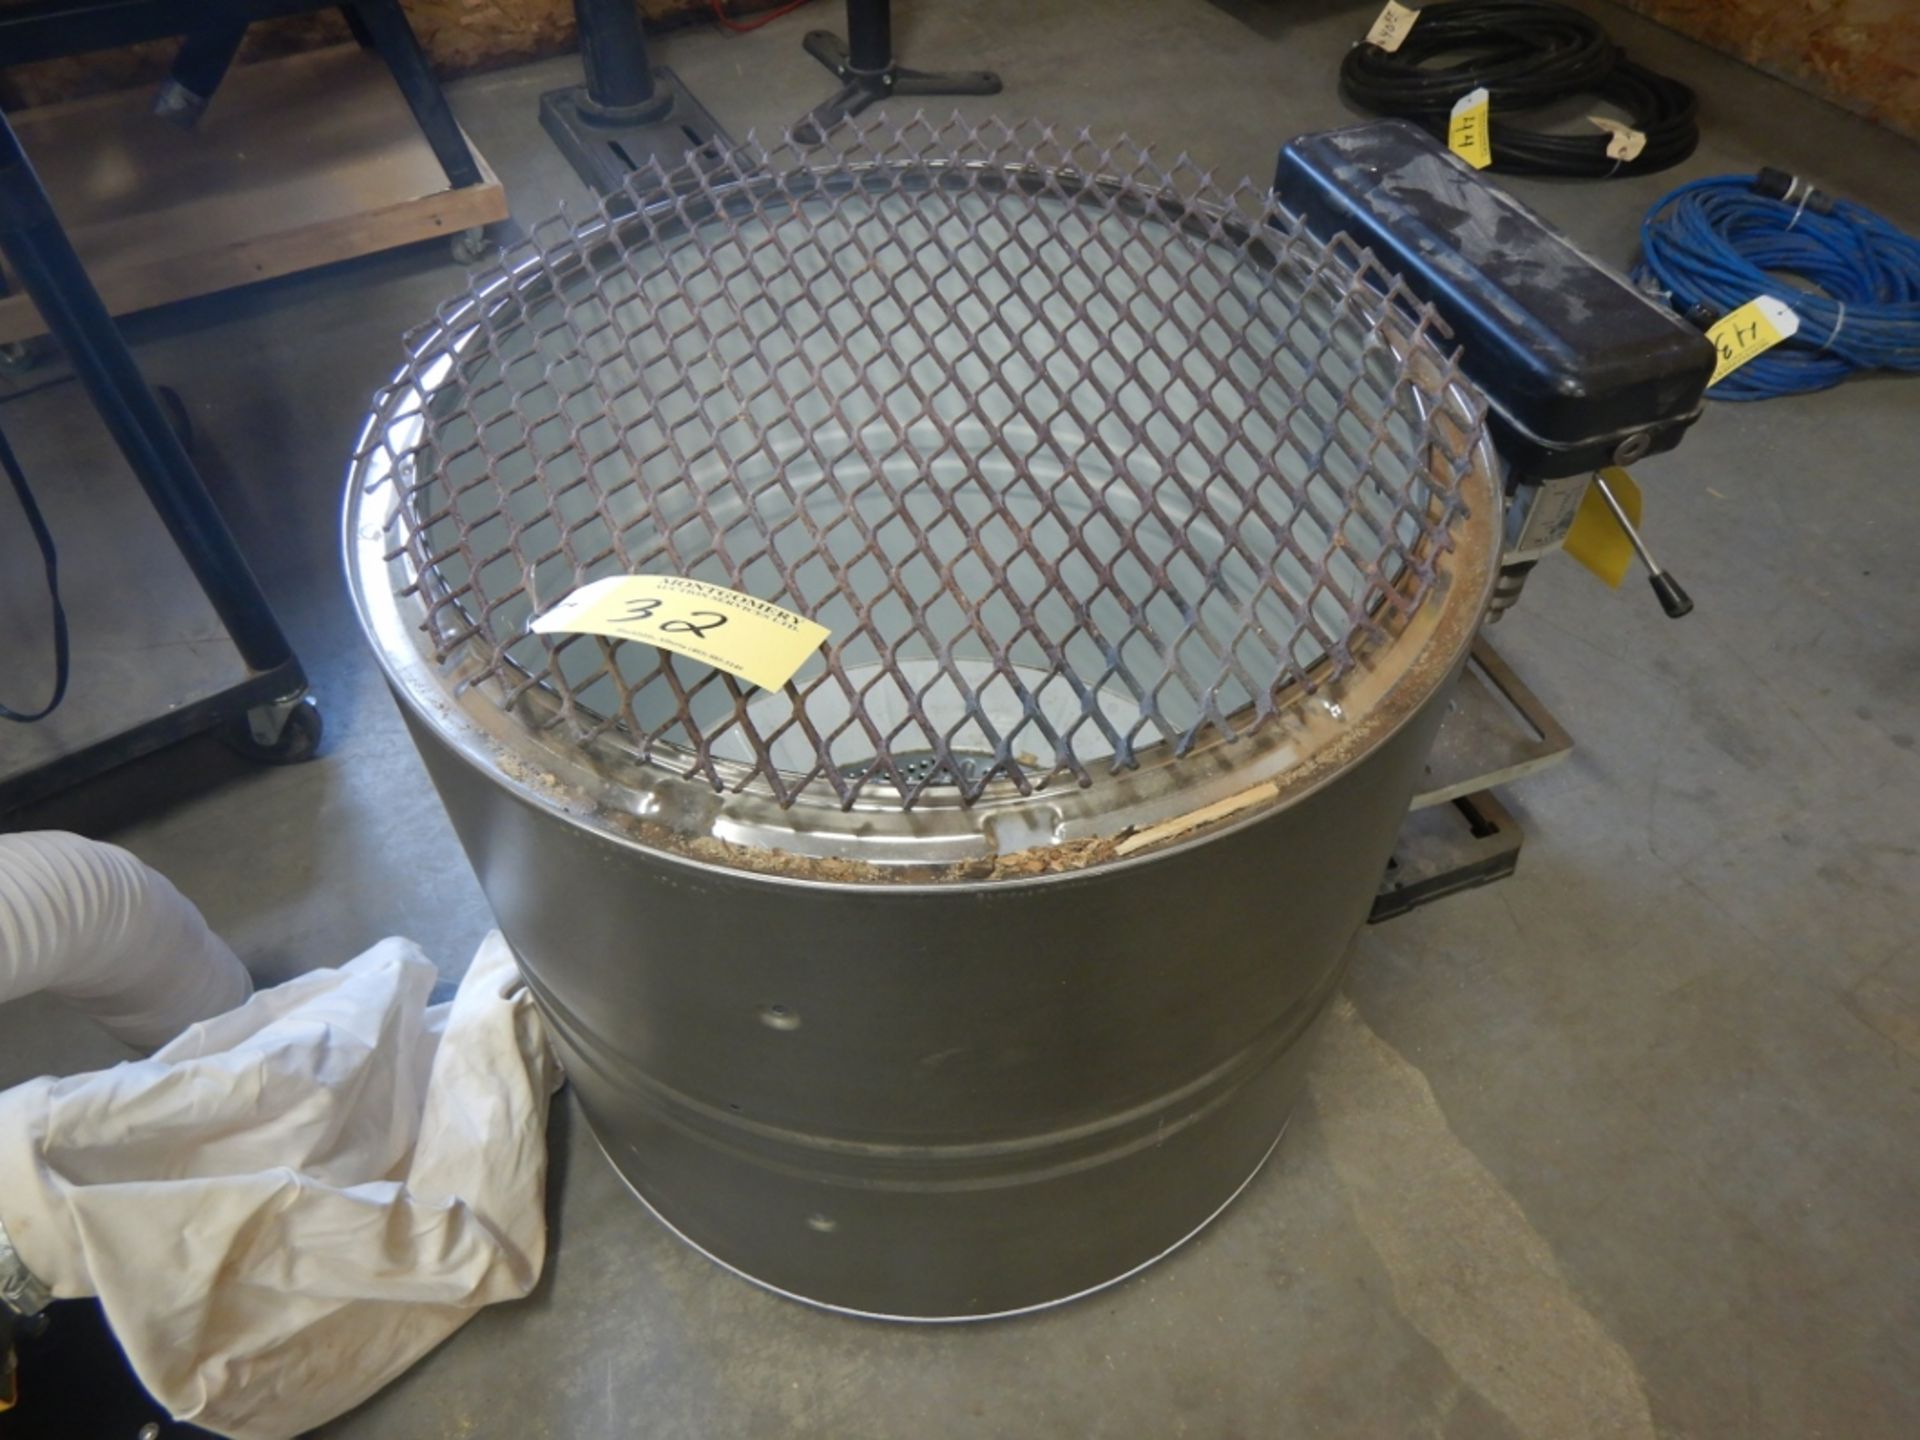 FIRE PIT W/ GRATE - MADE FROM DRYER DRUM